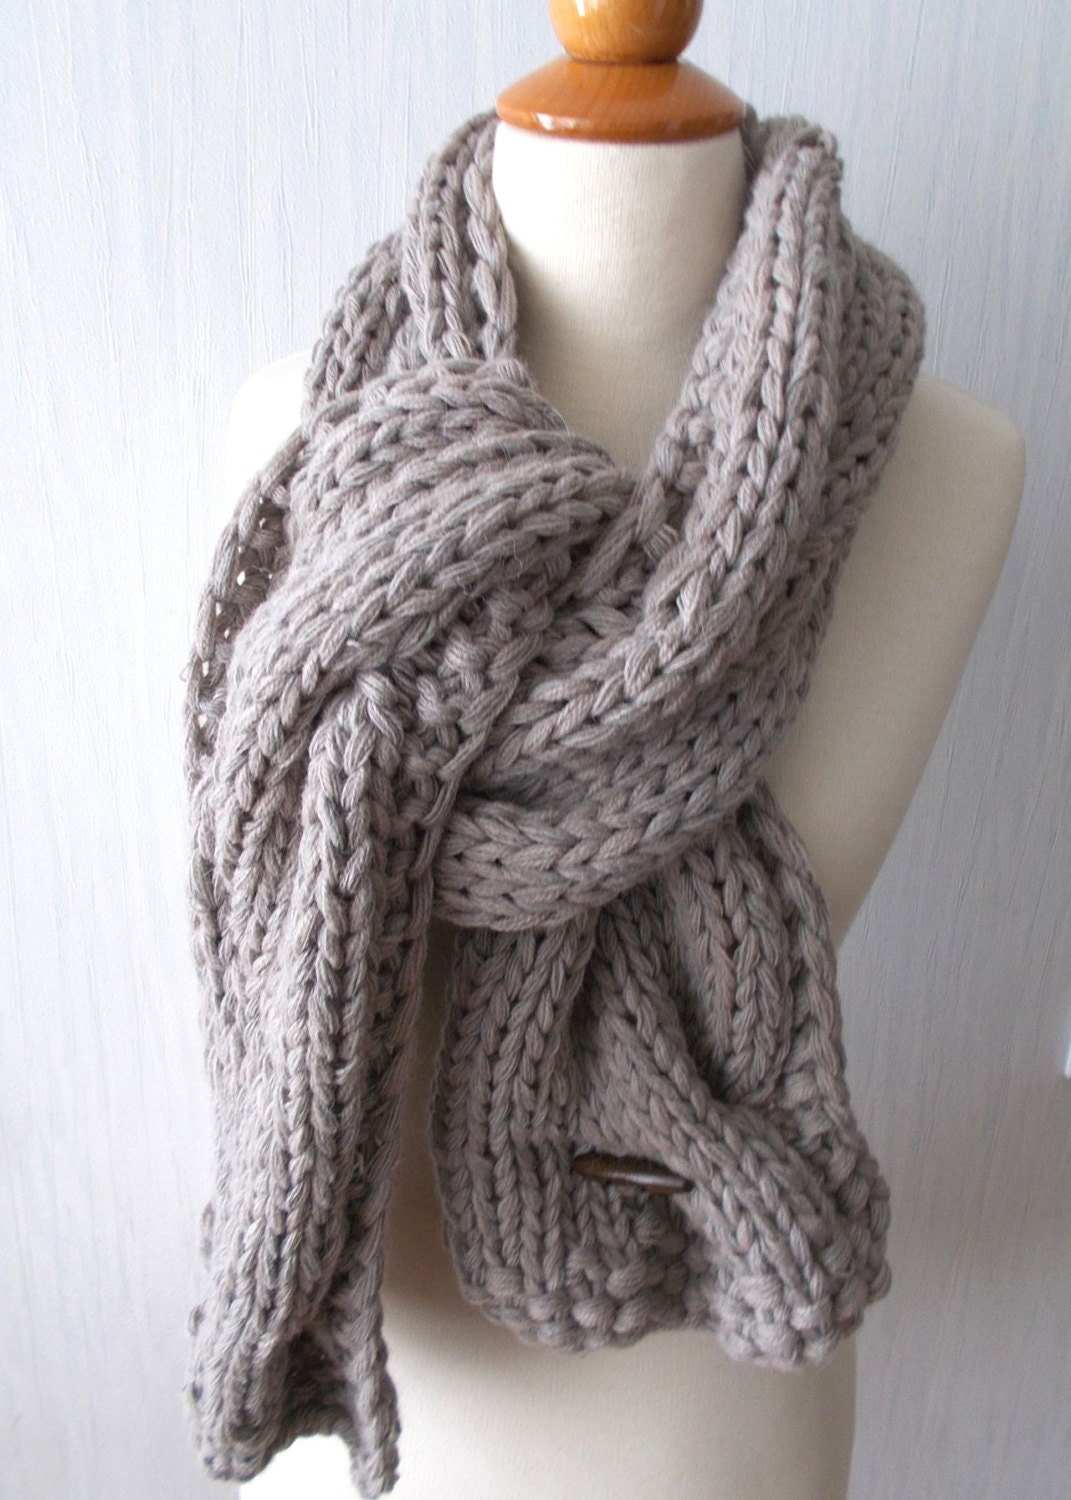 Chunky Scarf Handknit Big Cowl Extra Thick Cabled Soft in - Etsy